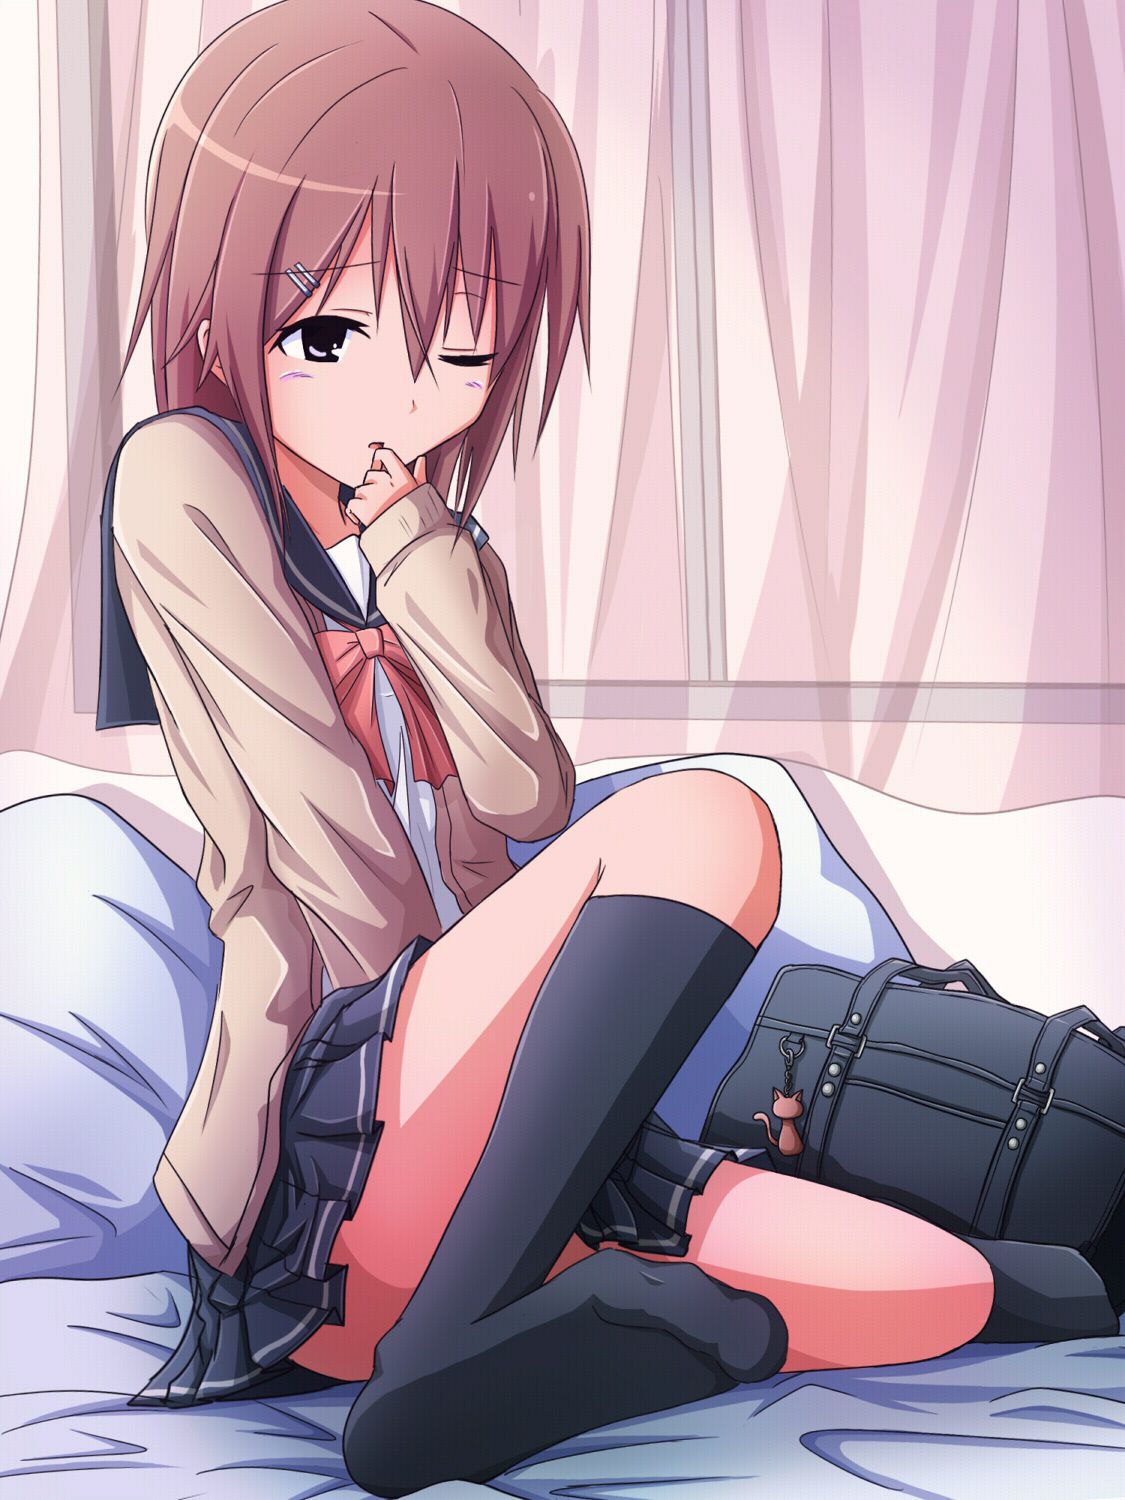 [Lolita masturbation] cute loli girl like to relax in bed or futon in her room and have a sharp copy of the figure that masturbation is banged off guard! 17